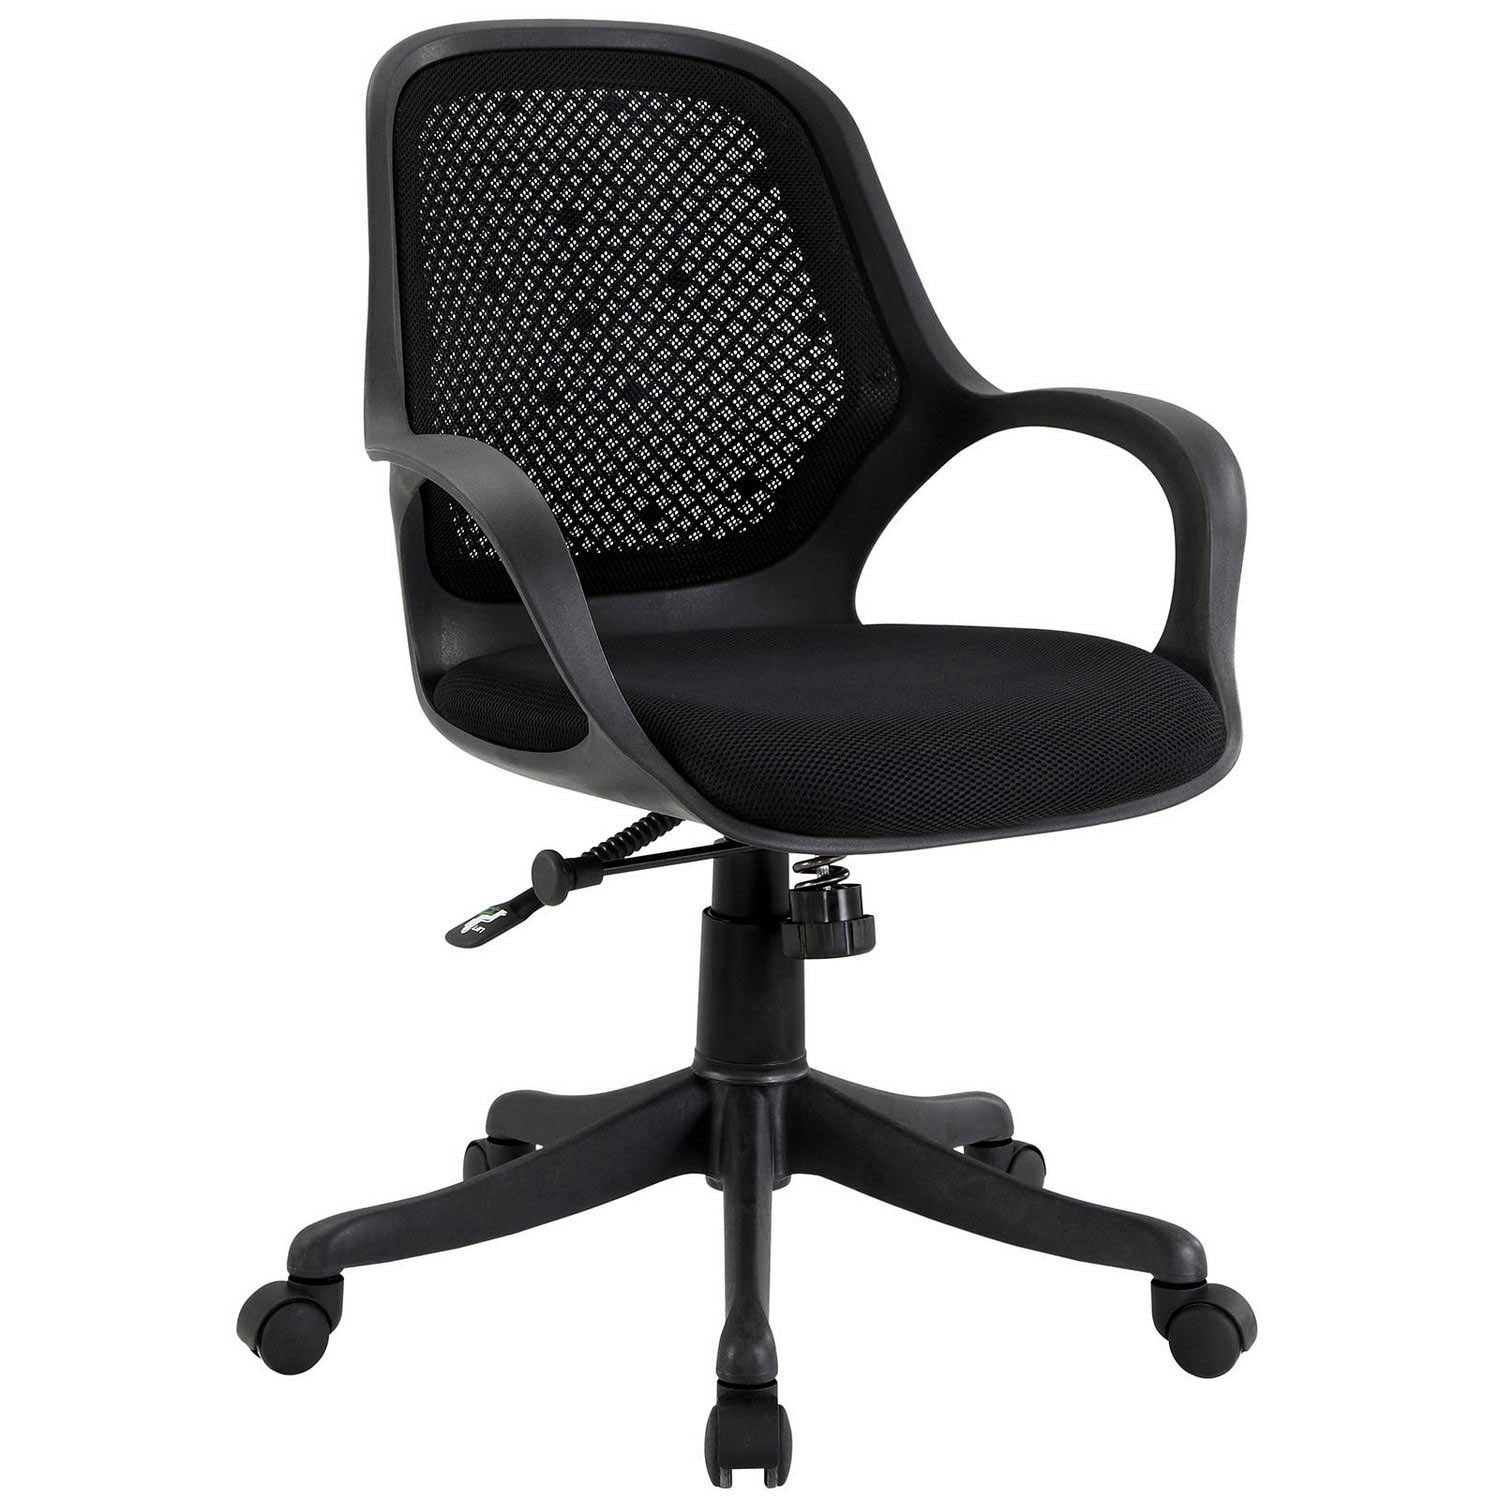 Modway Panorama Office Chair - Black